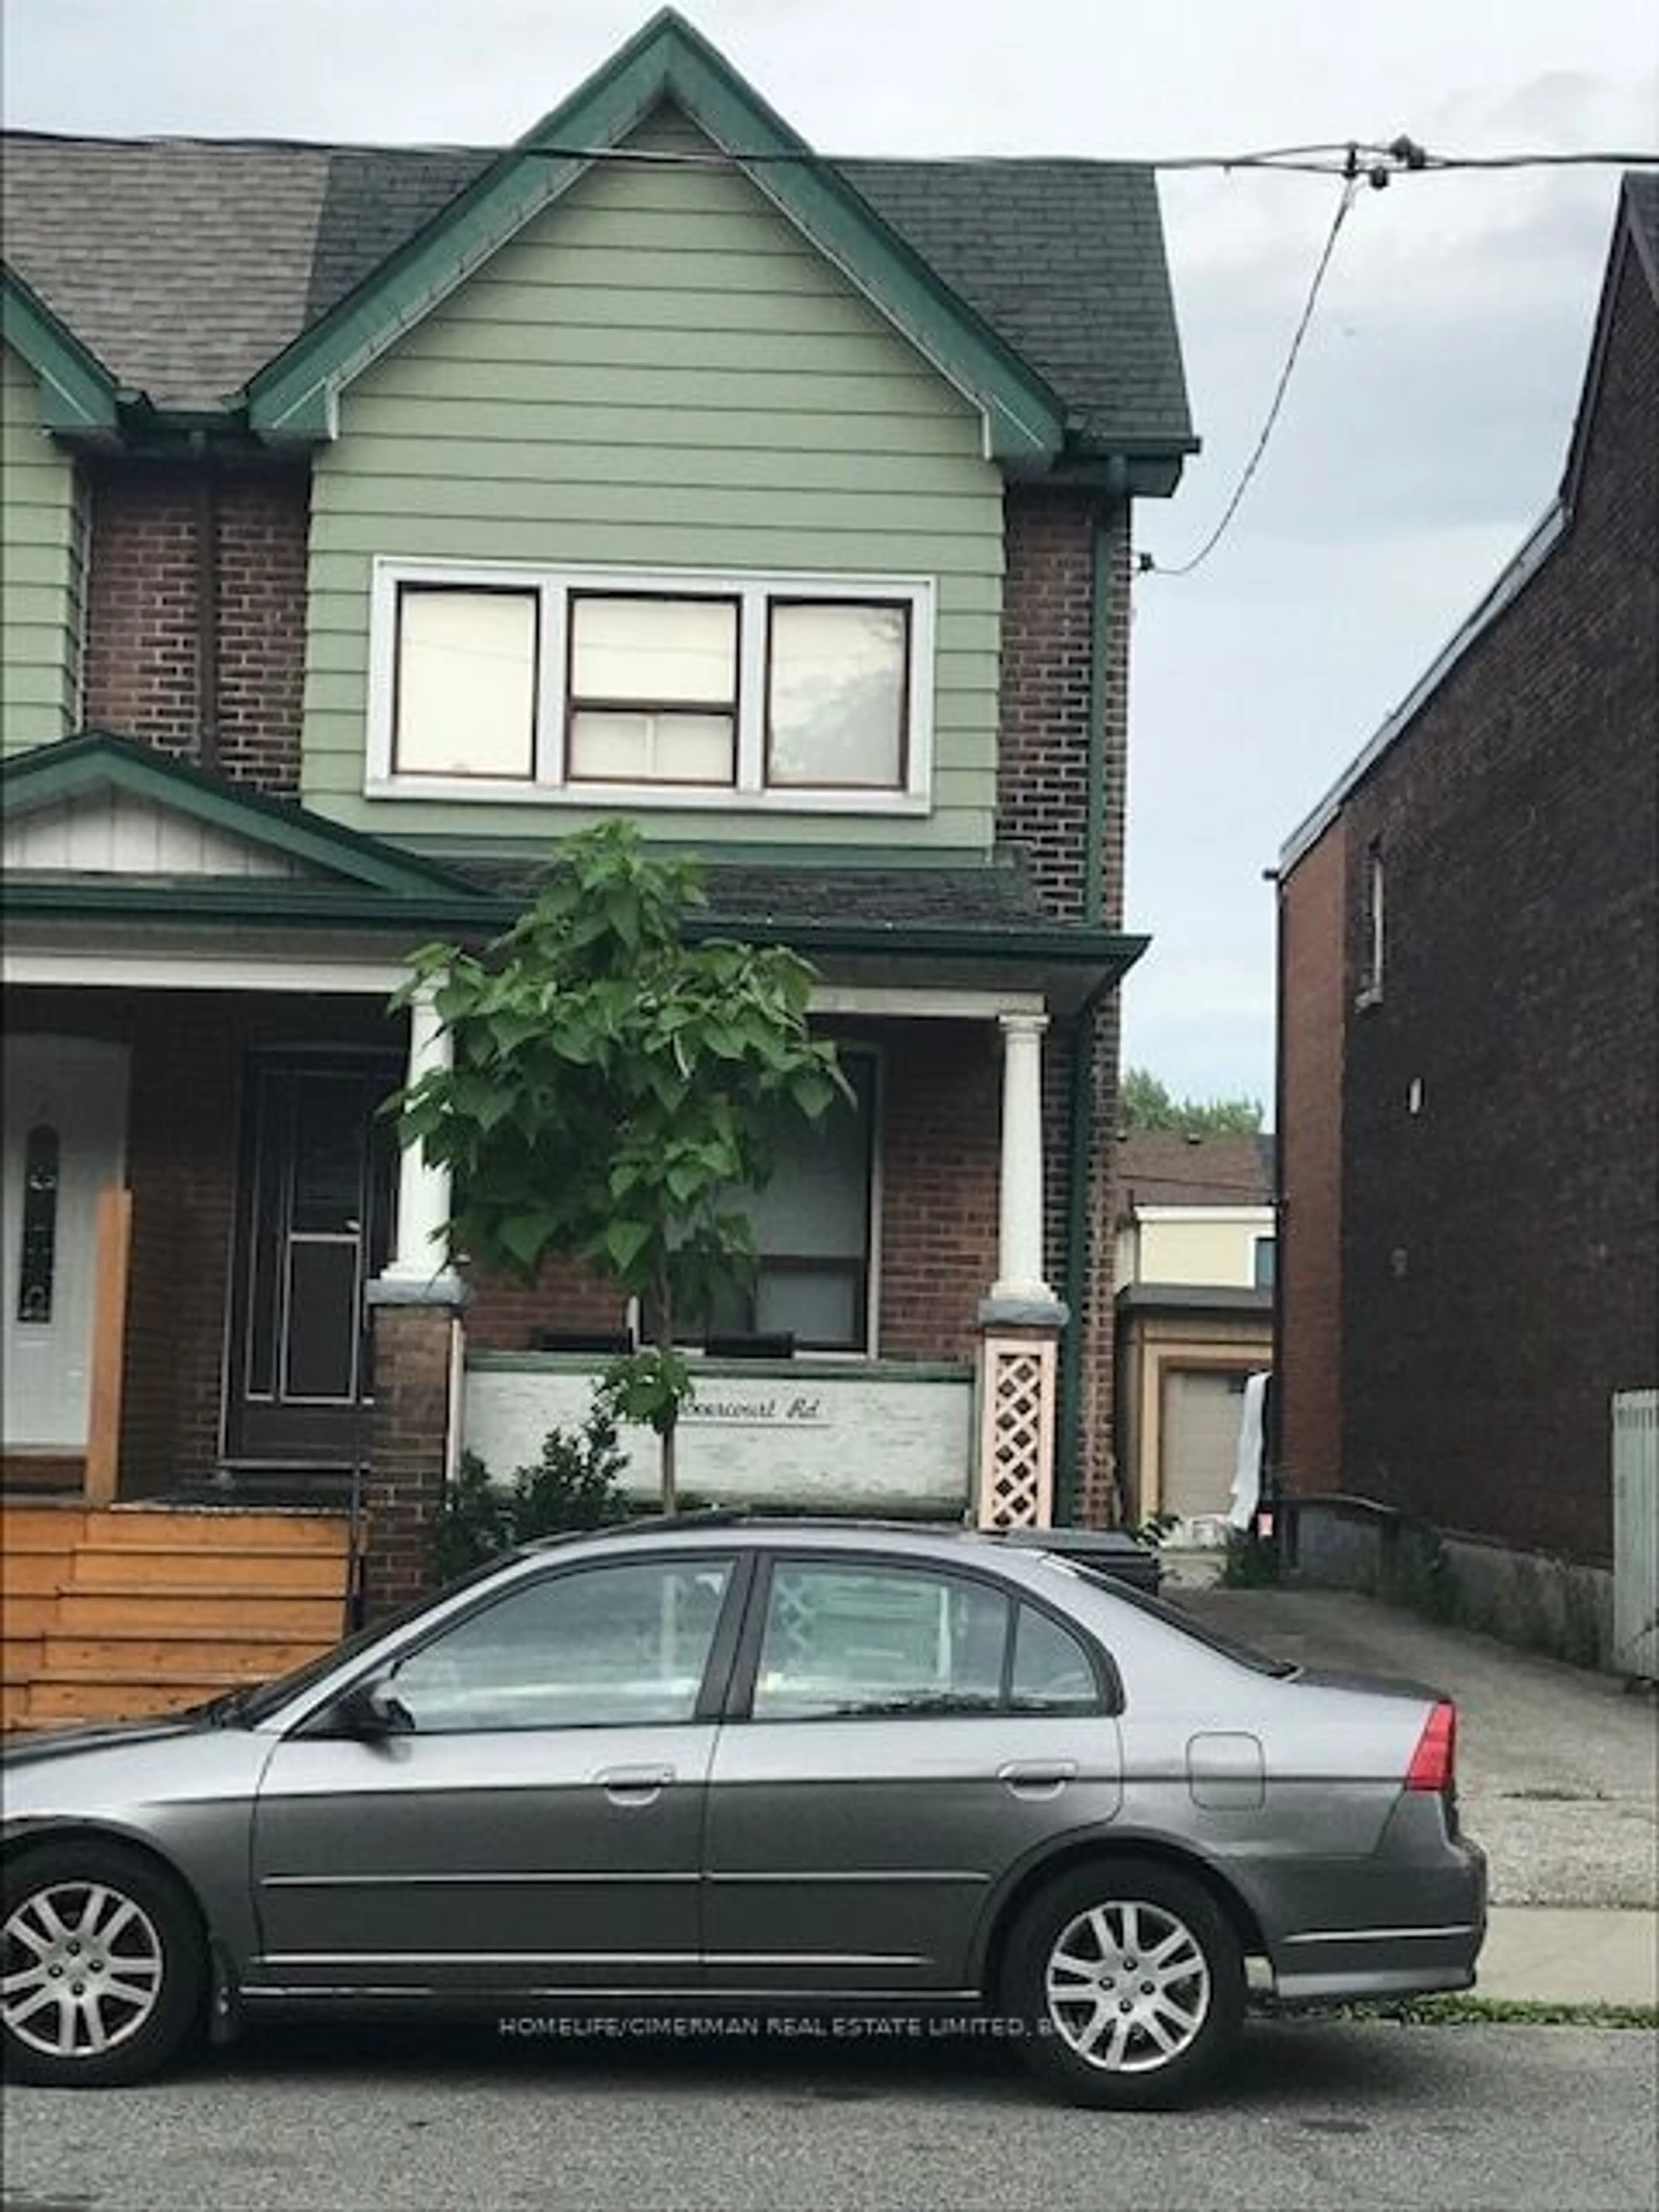 Frontside or backside of a home for 1031 Dovercourt Rd, Toronto Ontario M6H 2X7